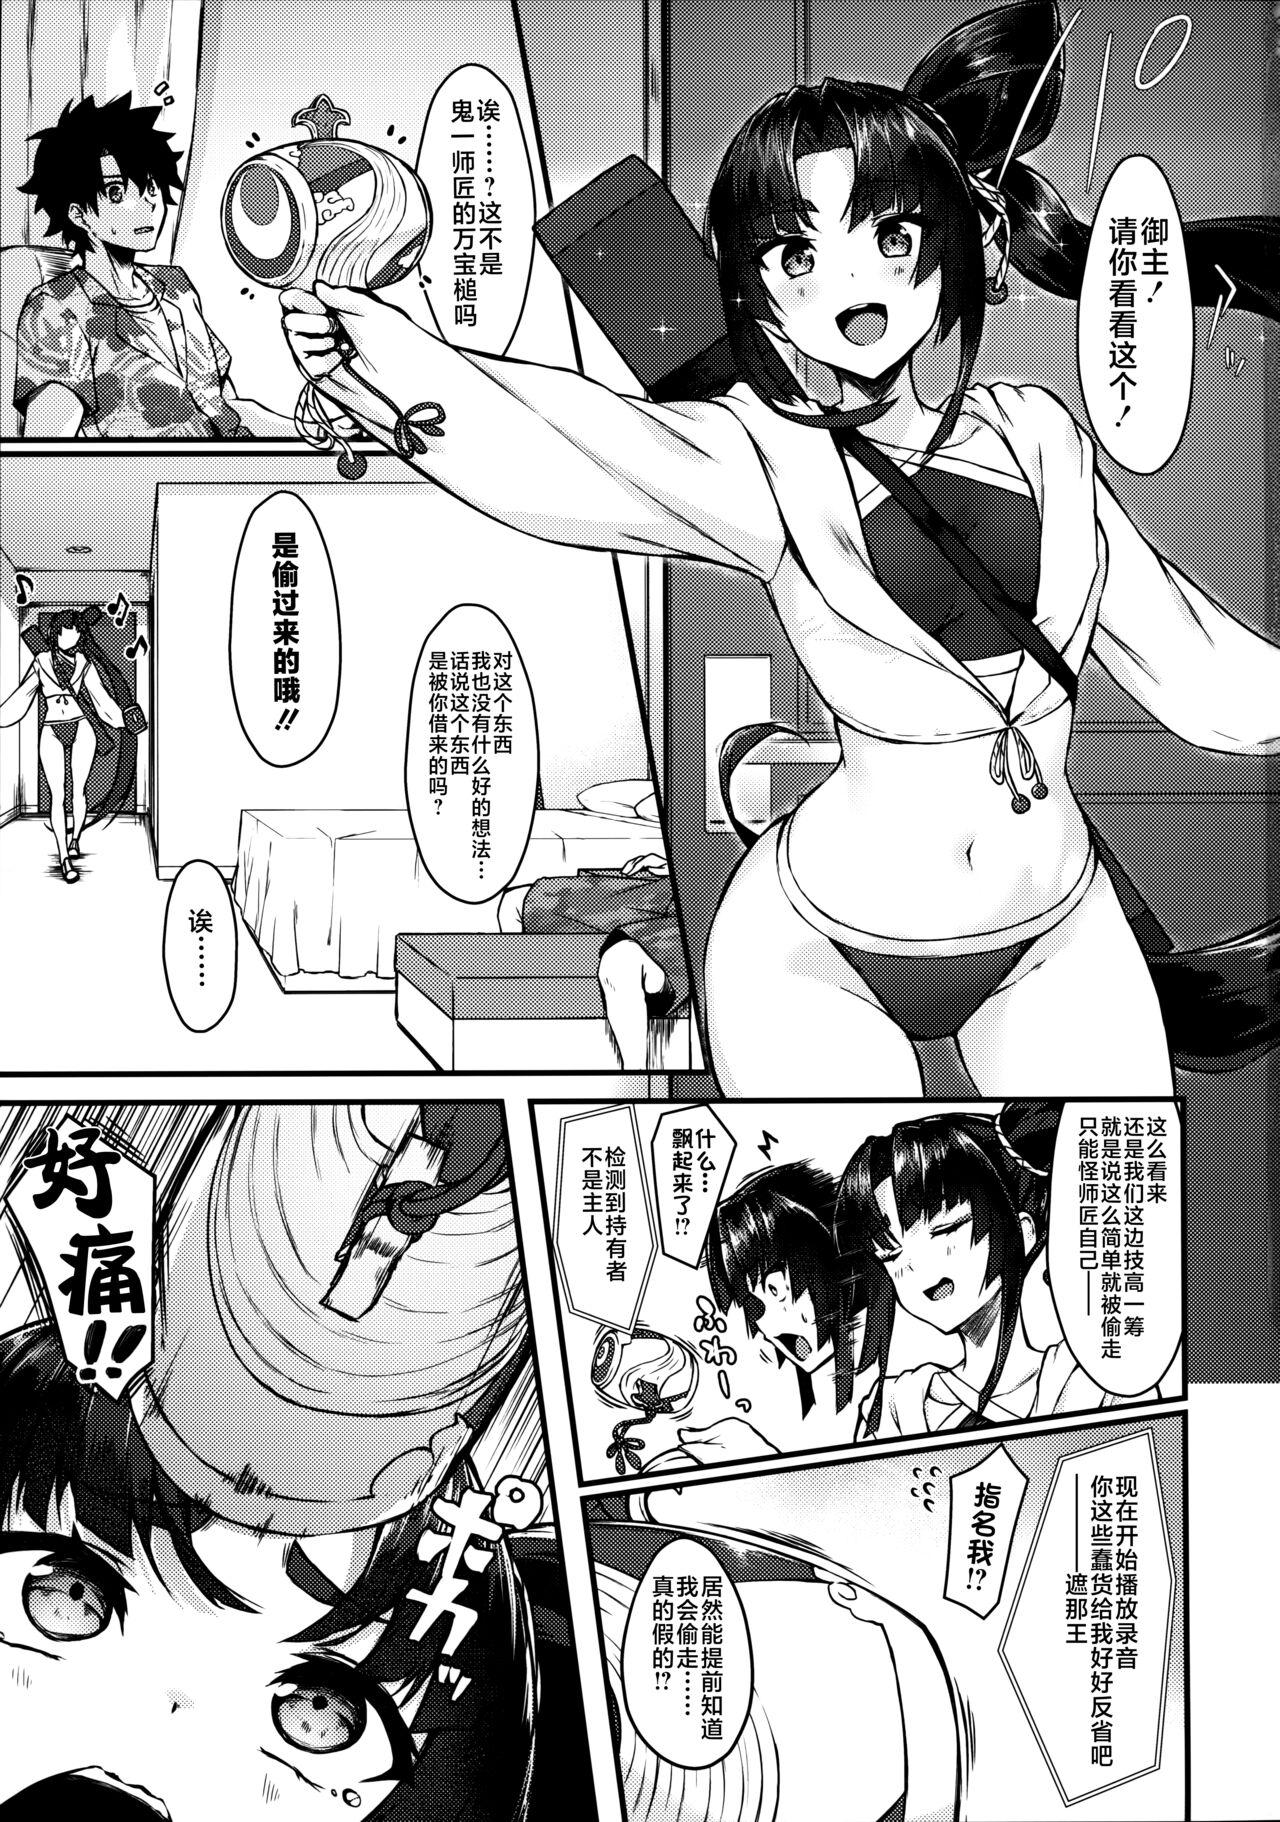 Best Blow Job Ever 牛くらべ - Fate grand order Gay Twinks - Page 3